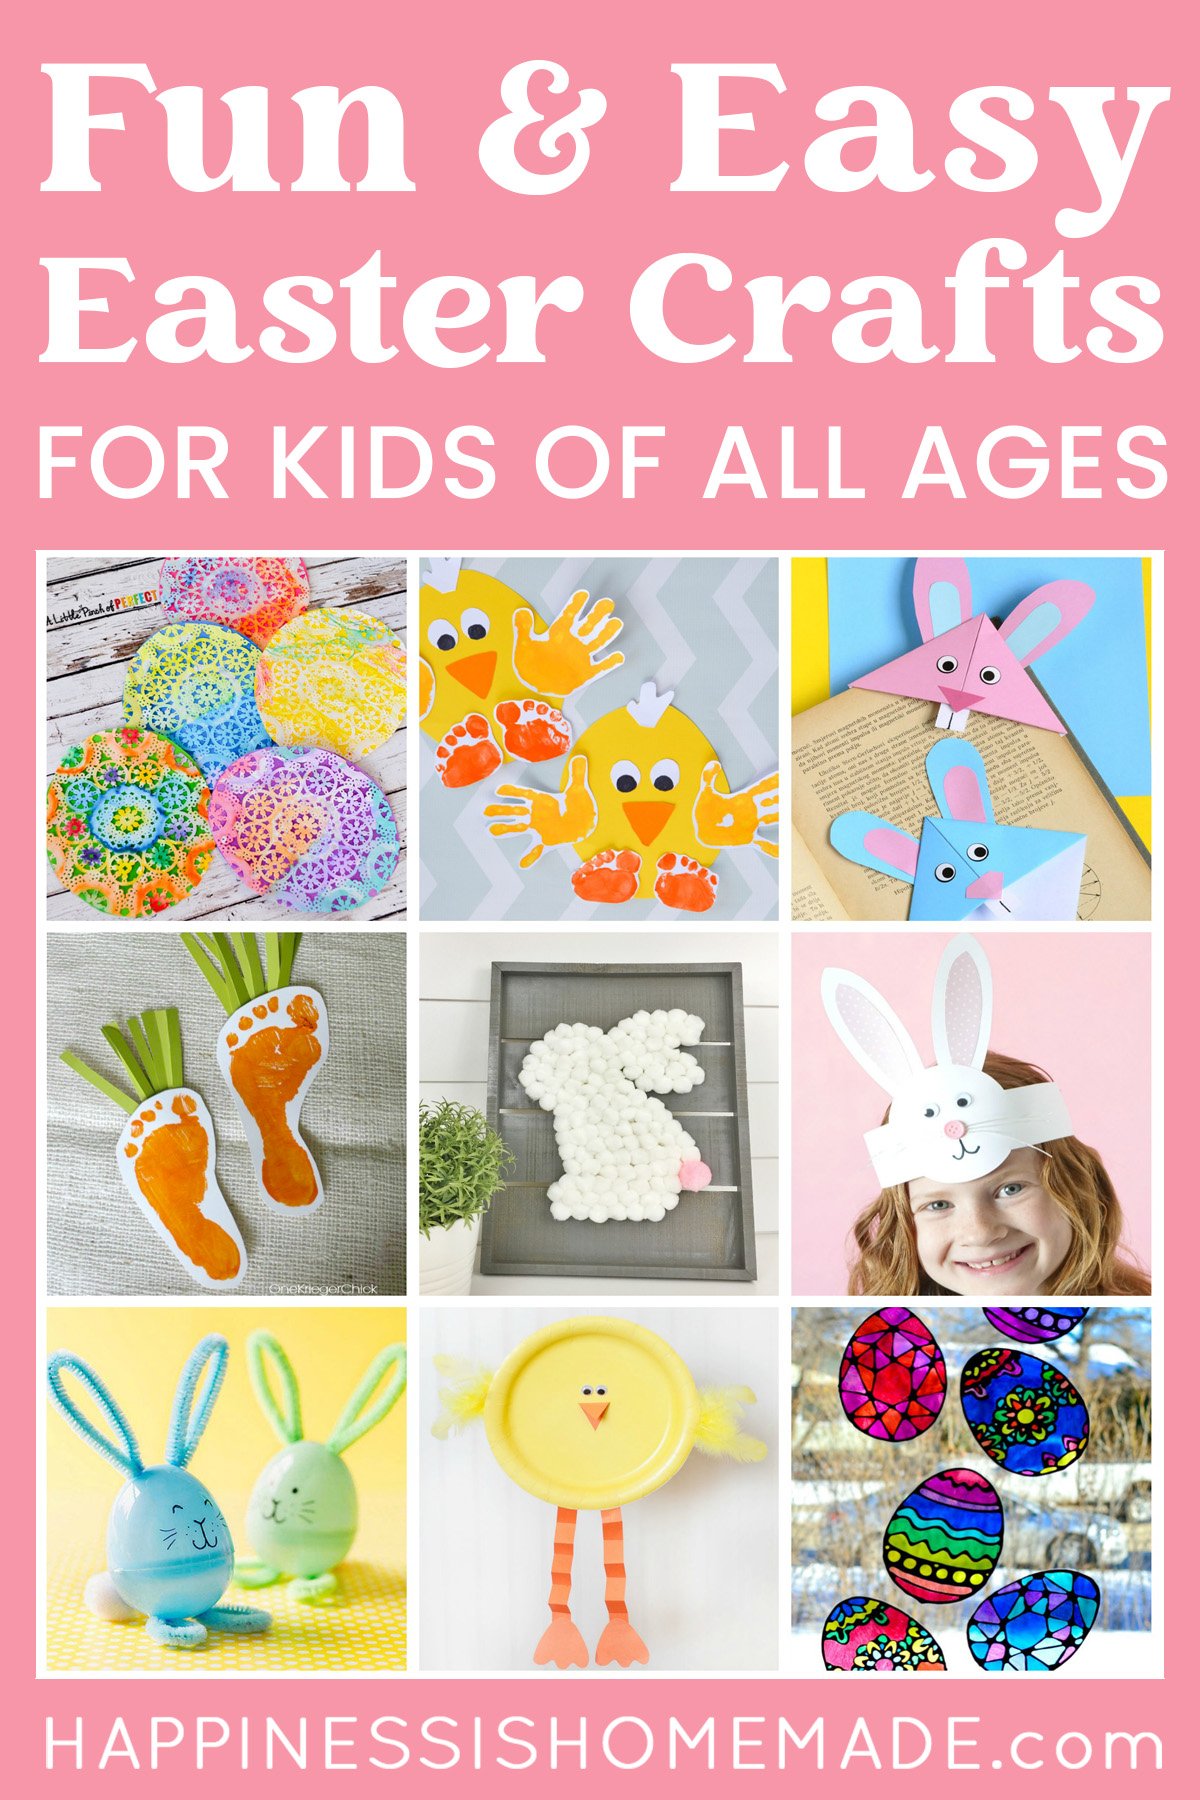 "Fun & Easy Easter Crafts for Kids of All Ages" graphic with collage of ideas